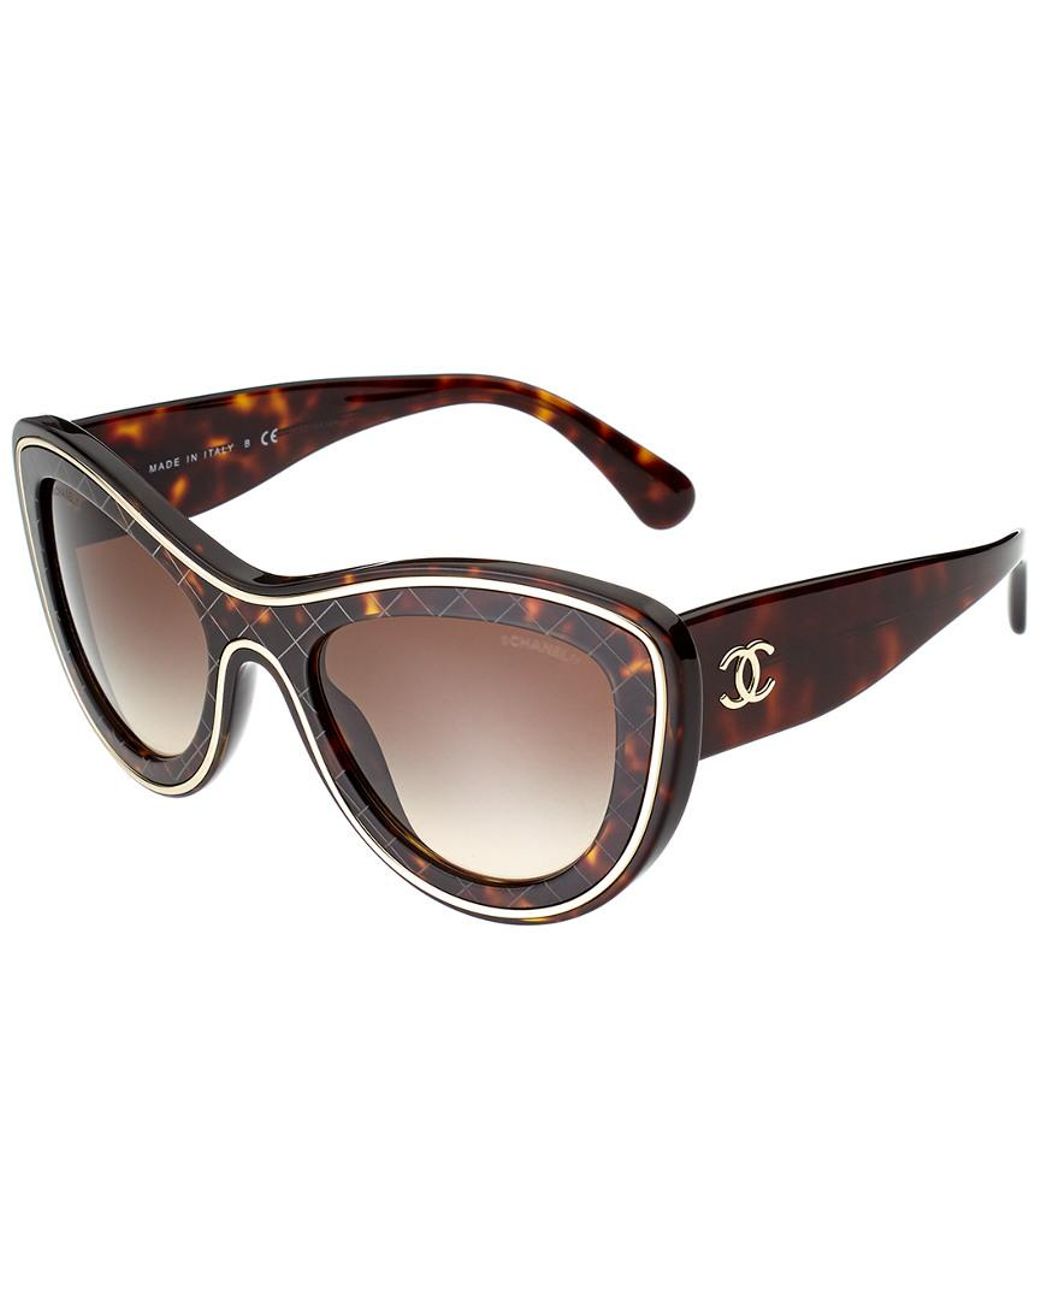 Chanel Women's 5399 53mm Polarized Sunglasses in Brown